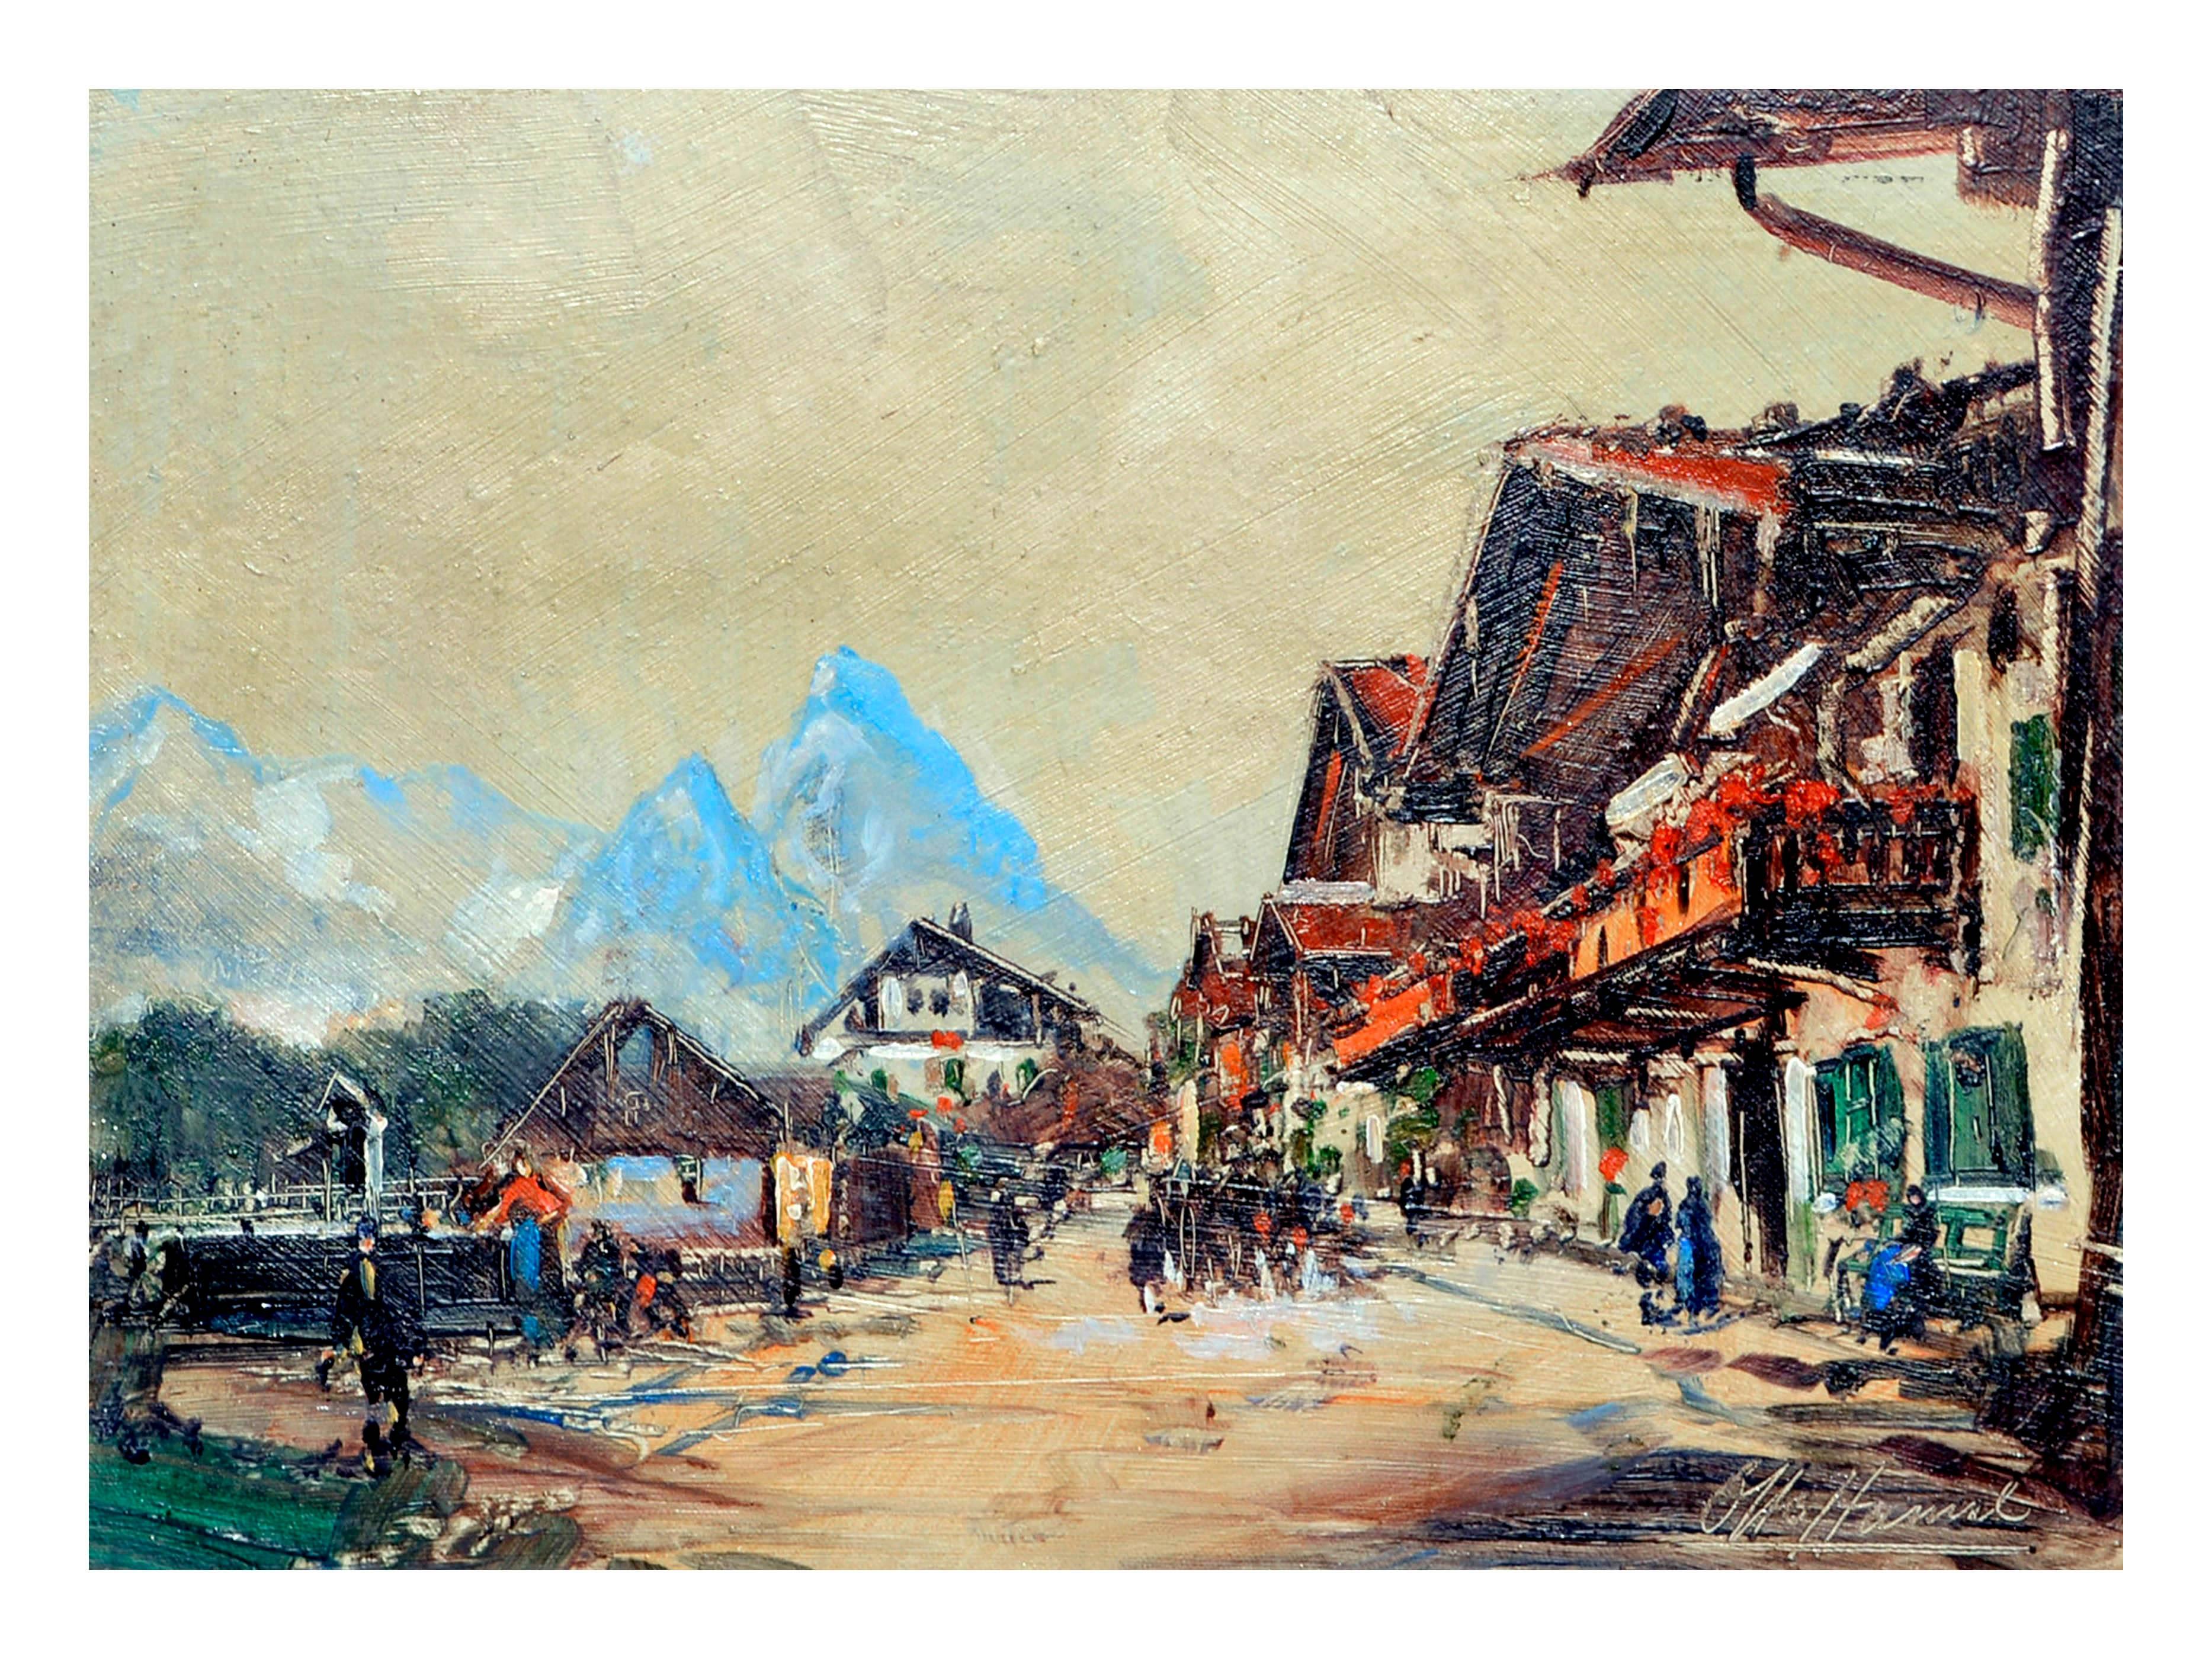 Early 20th Century Swiss Alps Village Landscape - Painting by Otto Hamel